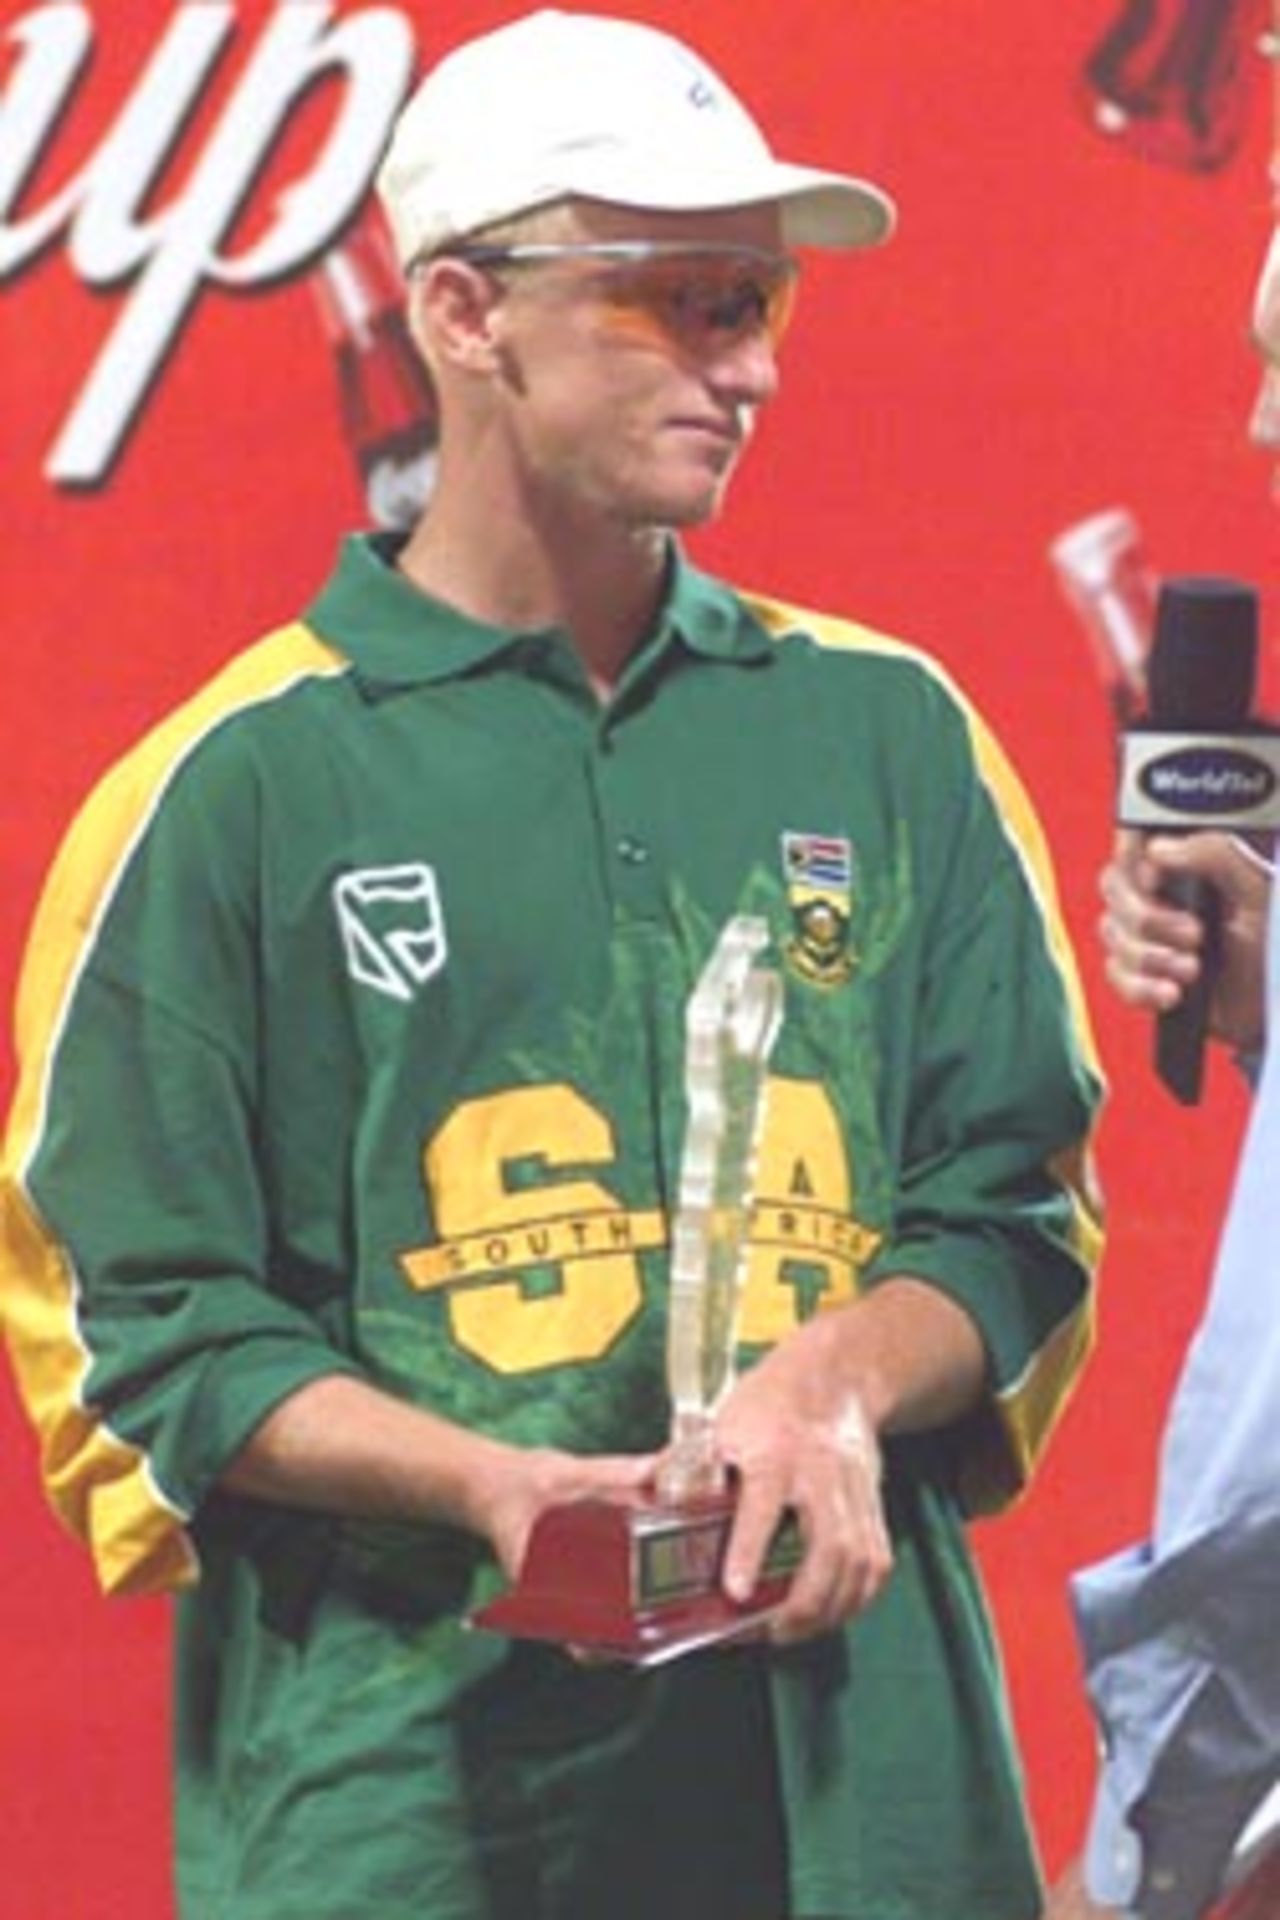 Man of the Match Mornantau Hayward at the presentation cremony, Coca-Cola Cup 1999/00, India v South Africa, Sharjah C.A. Stadium, 27 March 2000